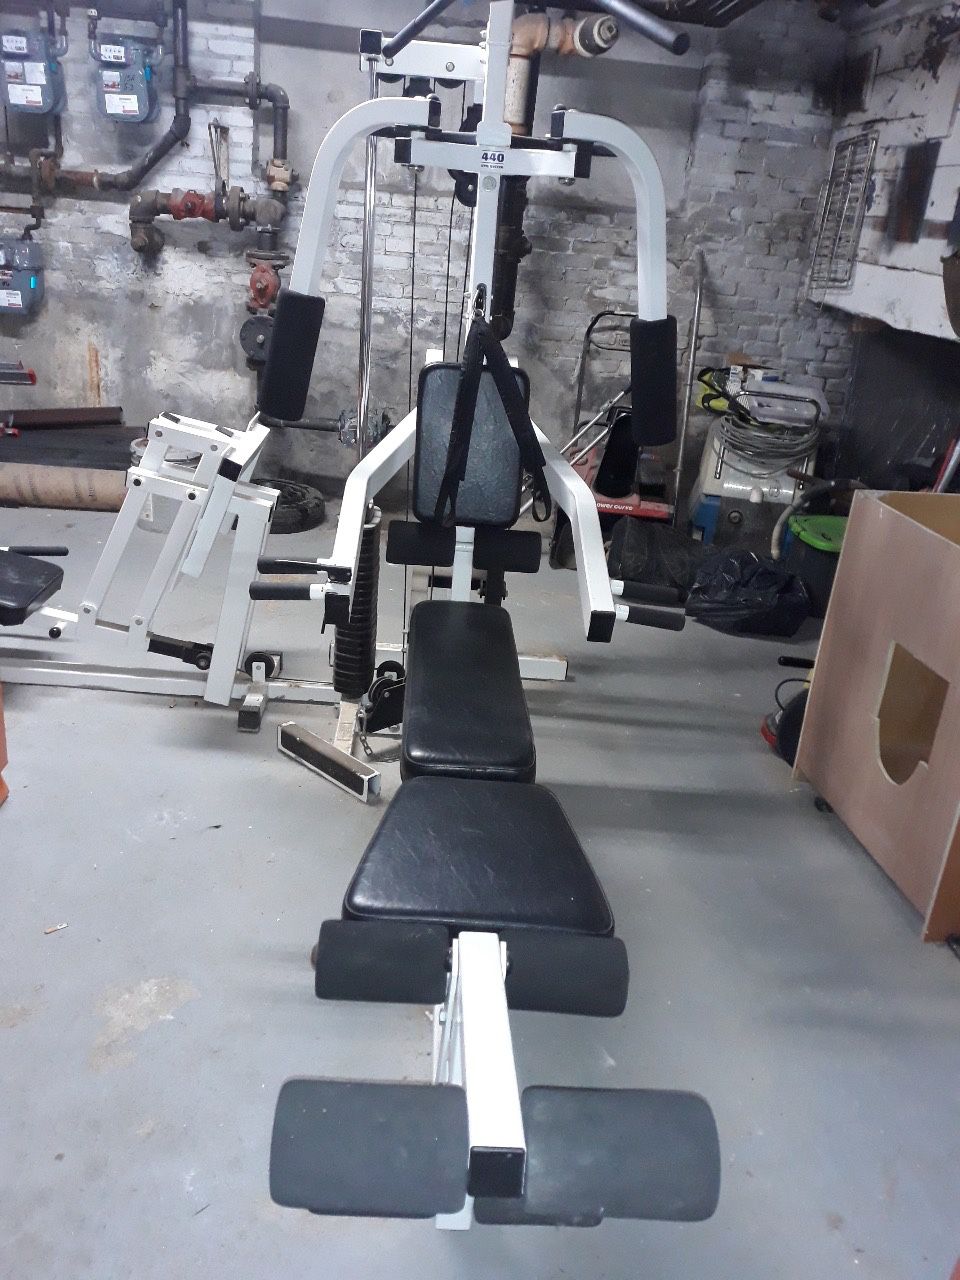 Exercise Equipment - We Deliver! $300 OBO